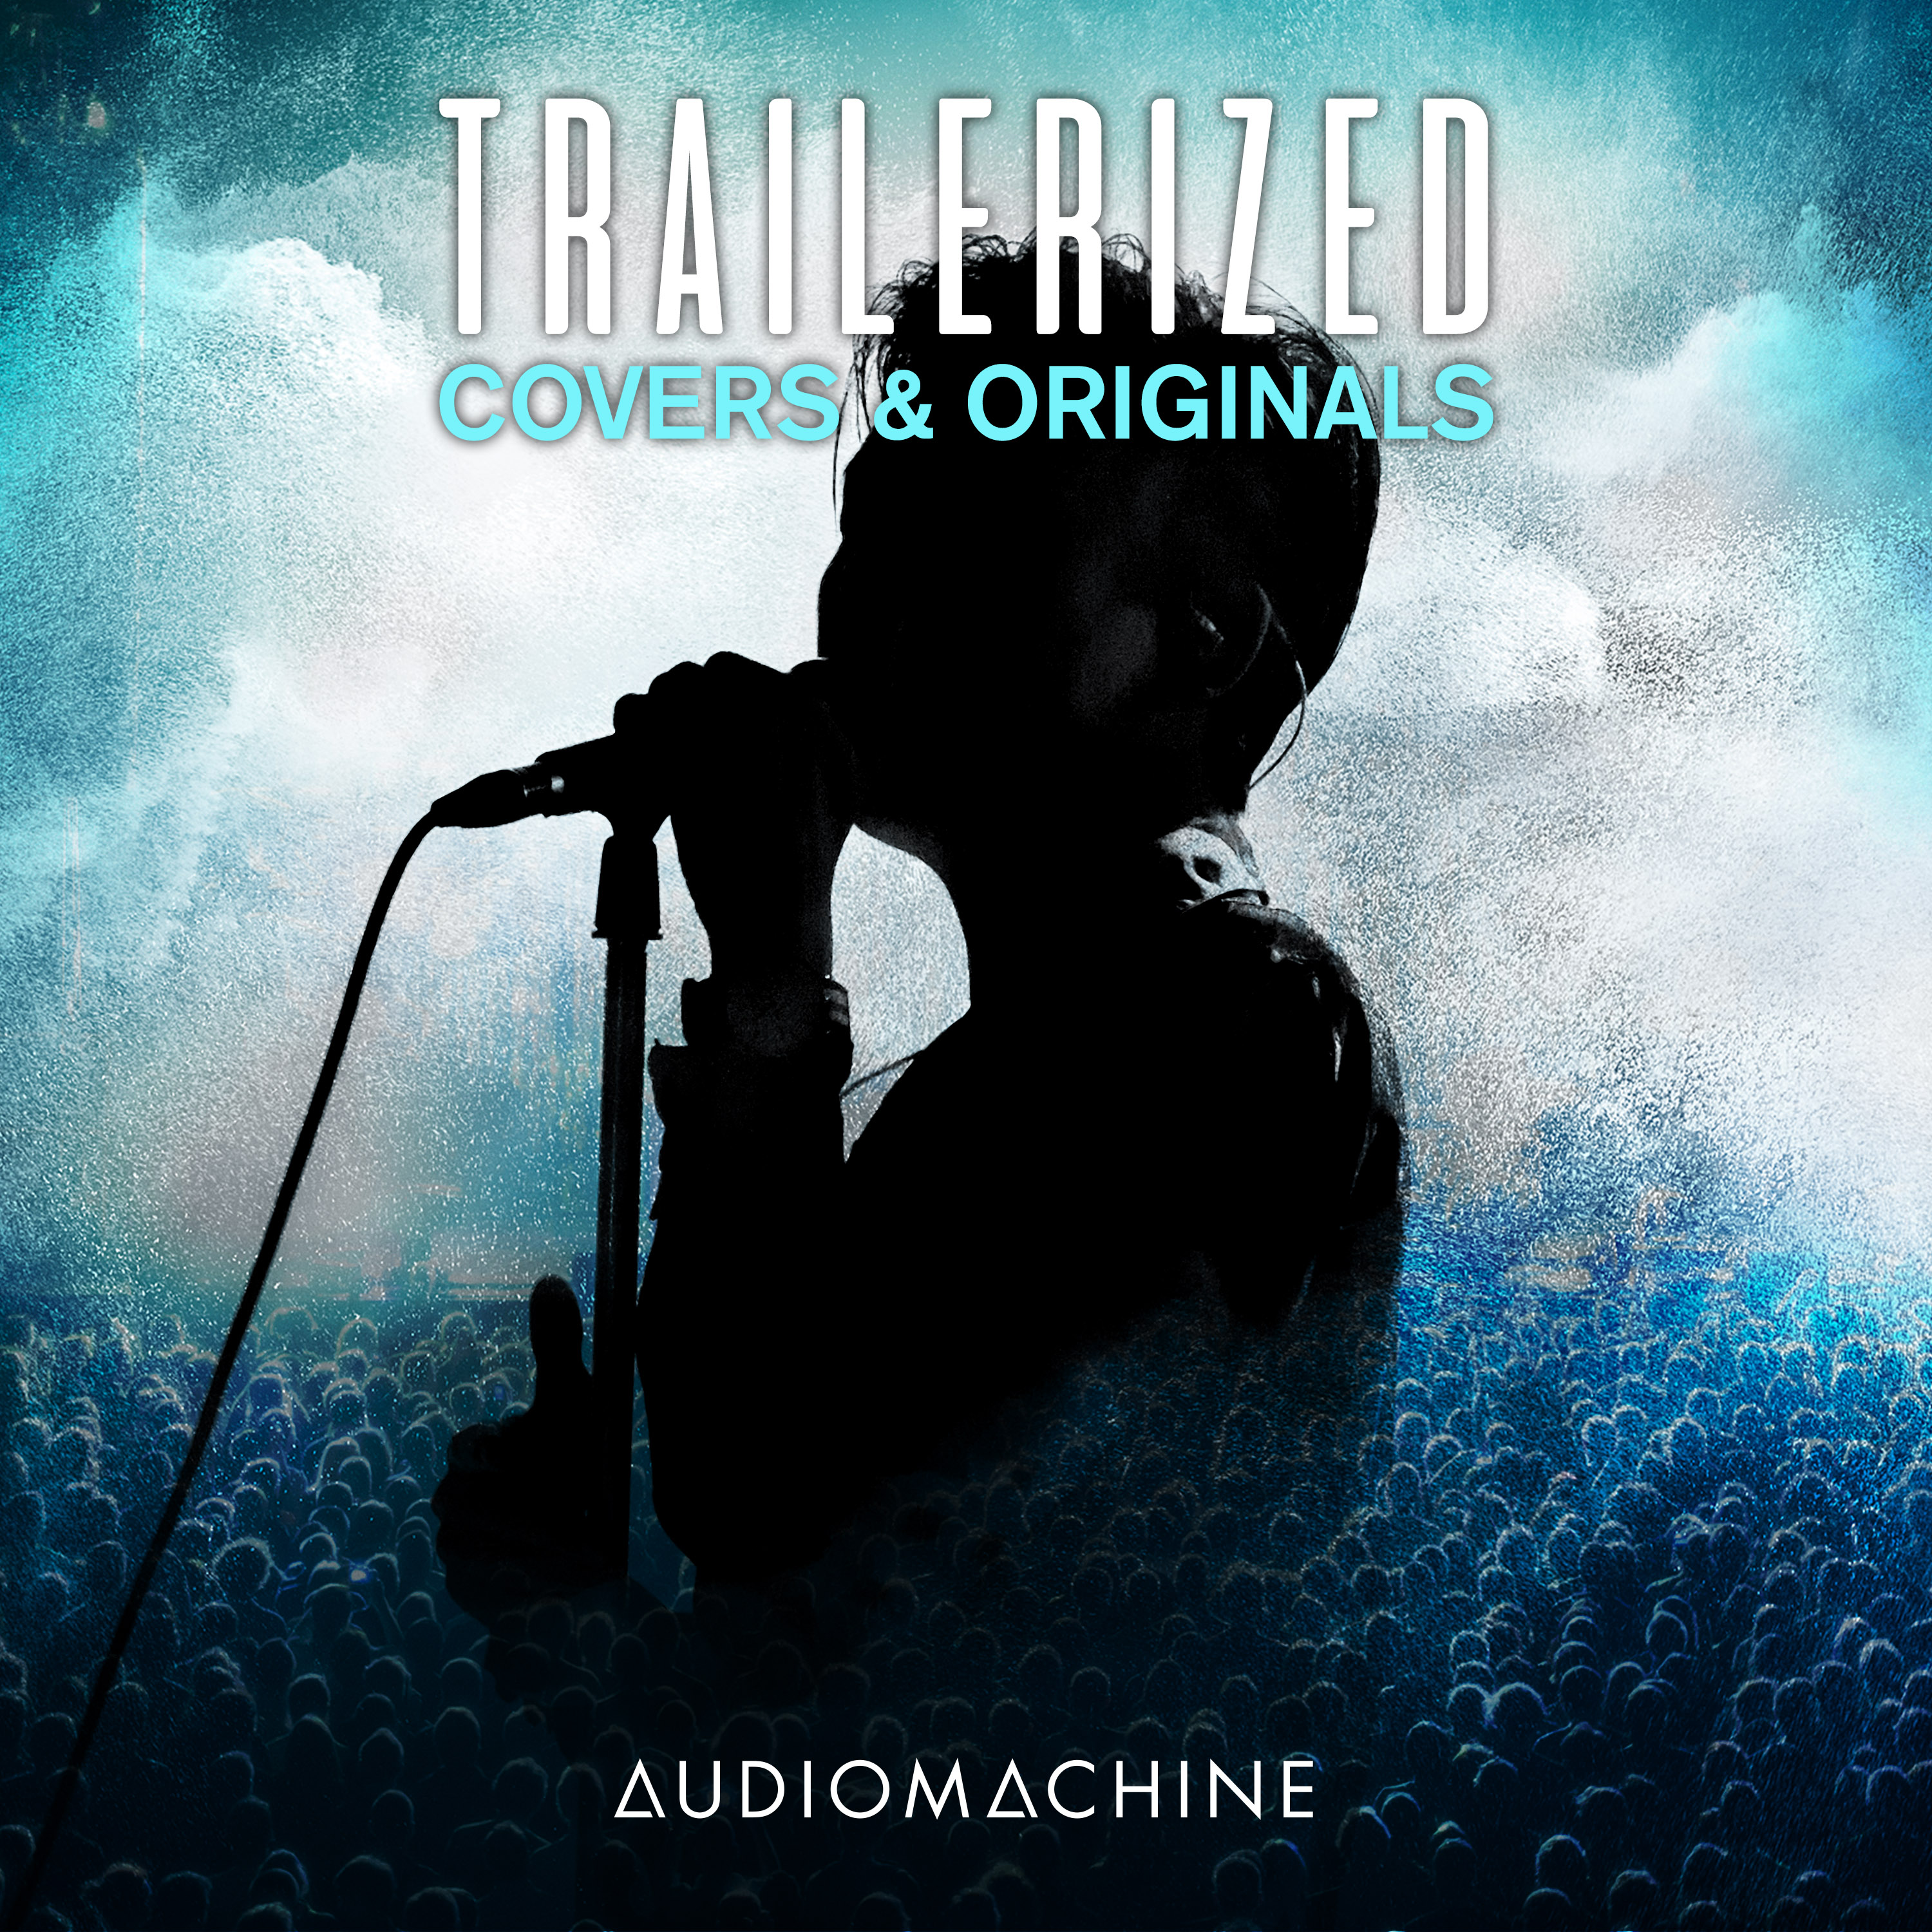 Trailerized: Covers and Originals